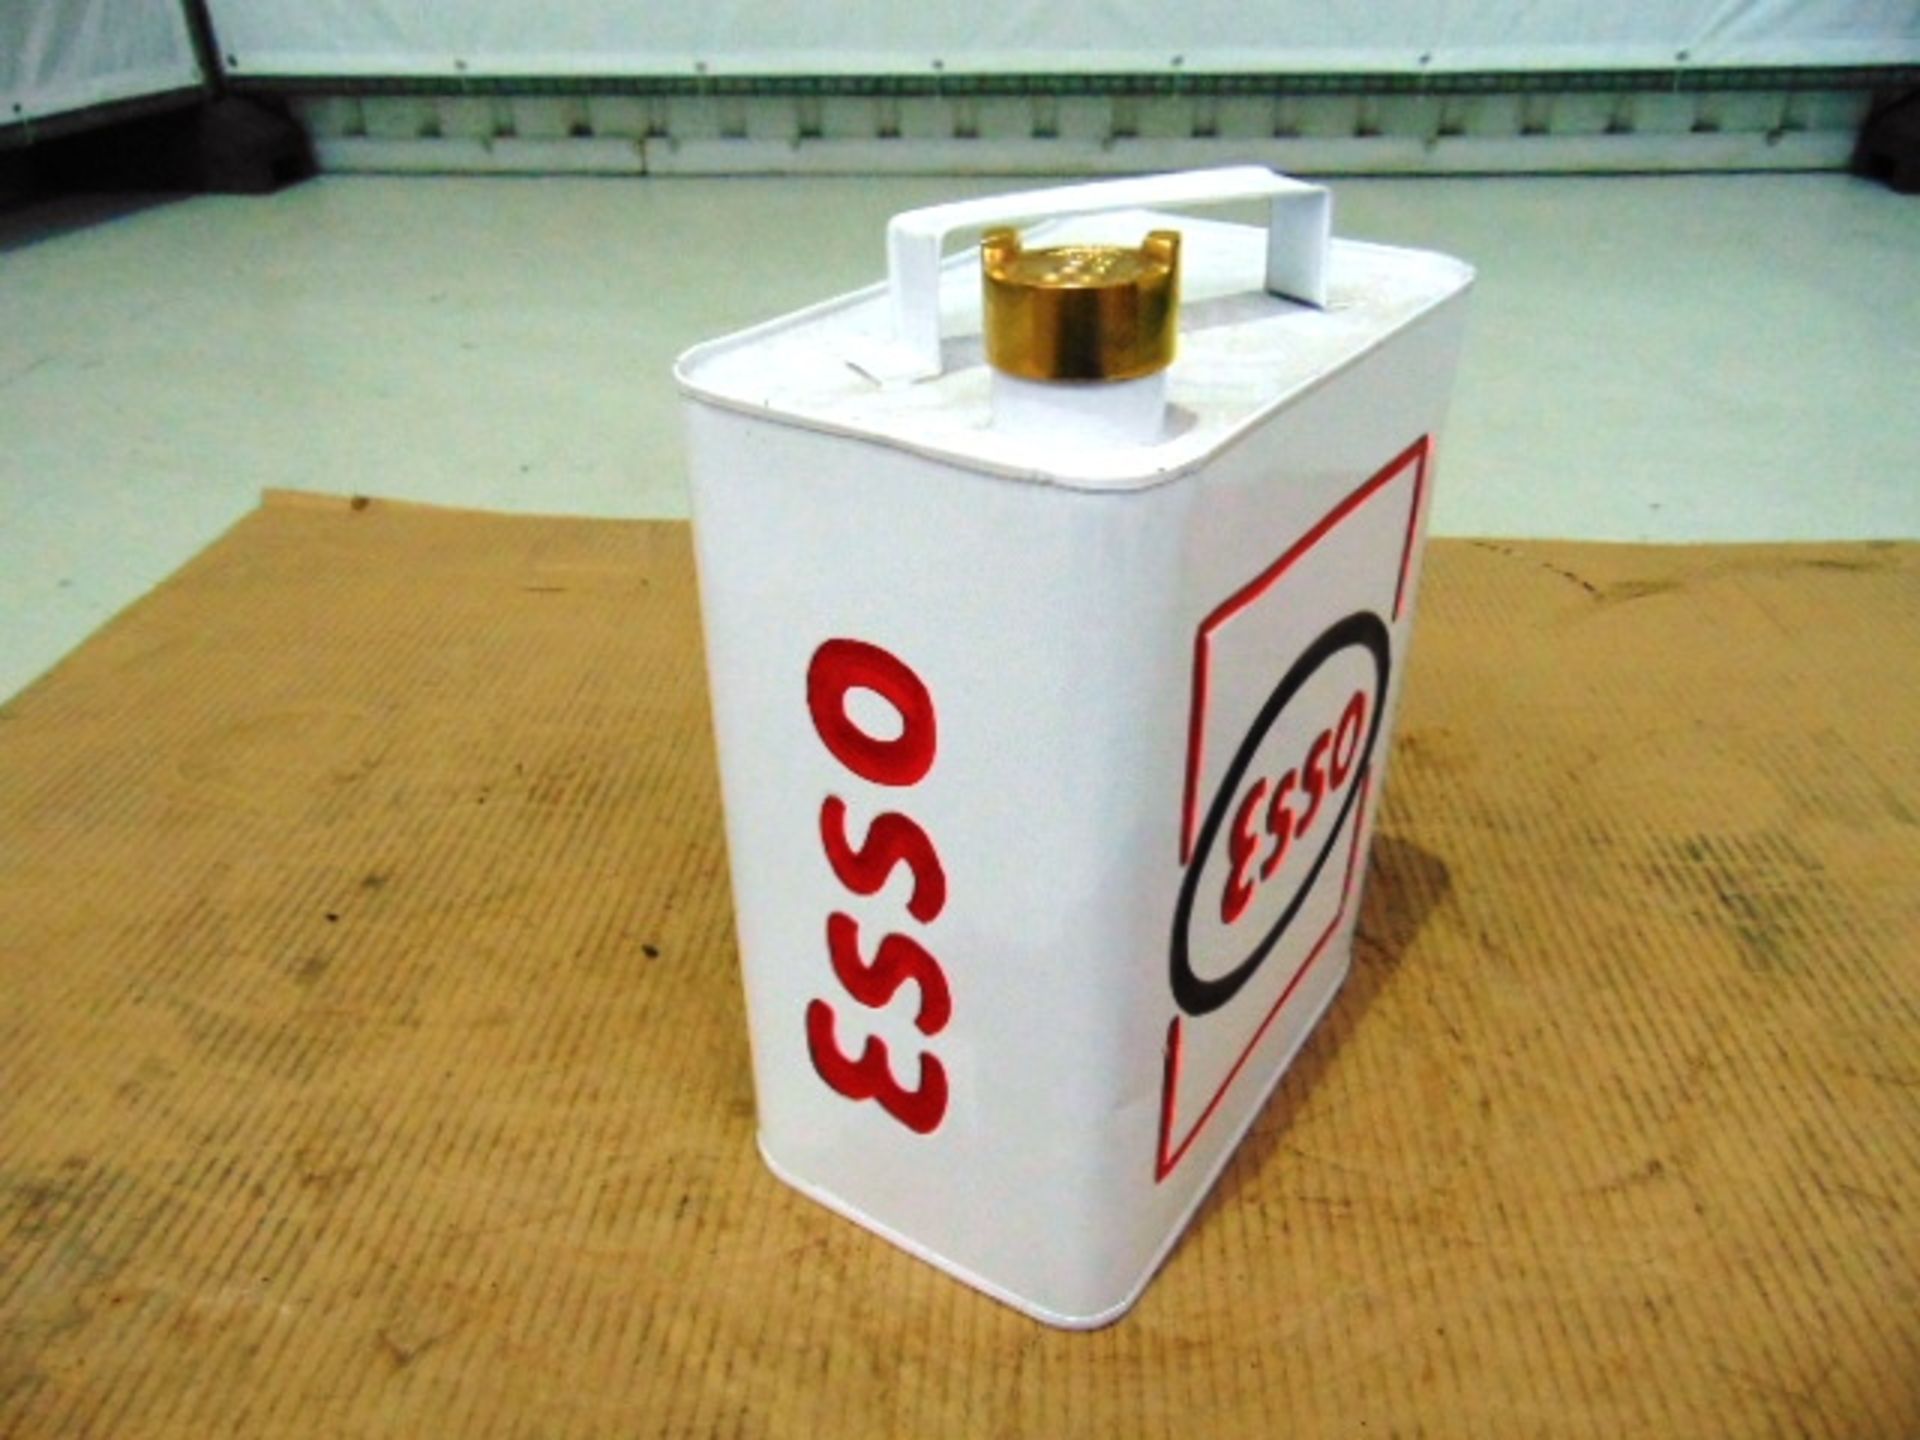 Esso Branded Oil Can - Image 2 of 6